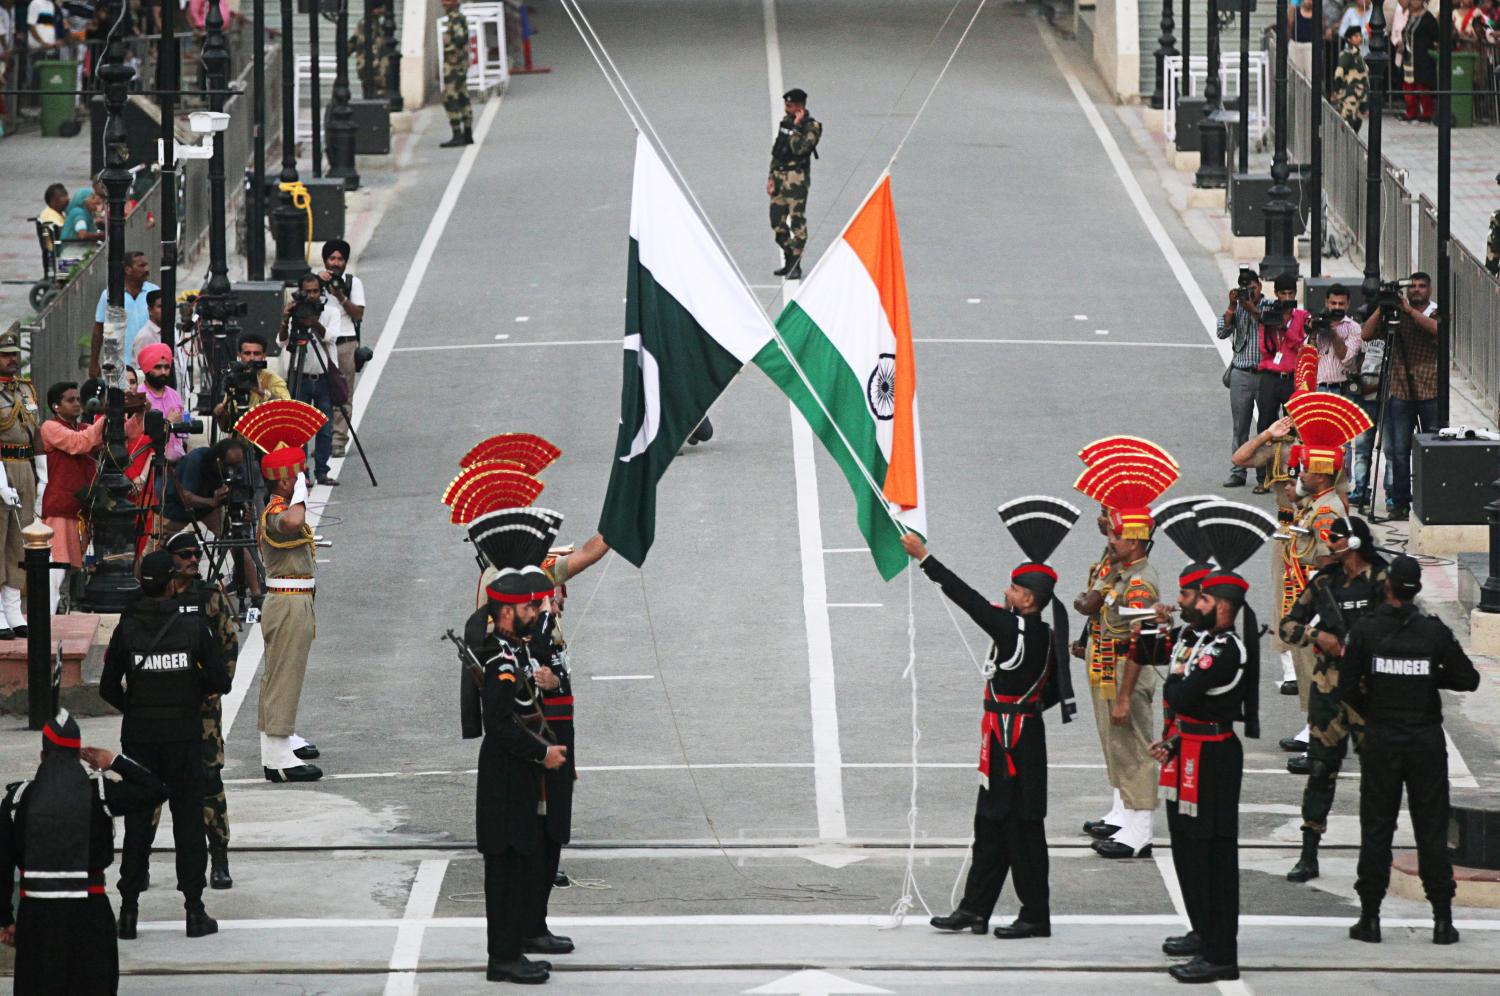 Pakistani Rangers (wearing black uniforms) and Indian Border Security Force (BSF) officers lower their national flags during parade on the Pakistan's 72nd Independence Day, at the Pakistan-India joint check-post at Wagah border, near Lahore, Pakistan August 14, 2019. REUTERS/Mohsin Raza - RC14044E1270